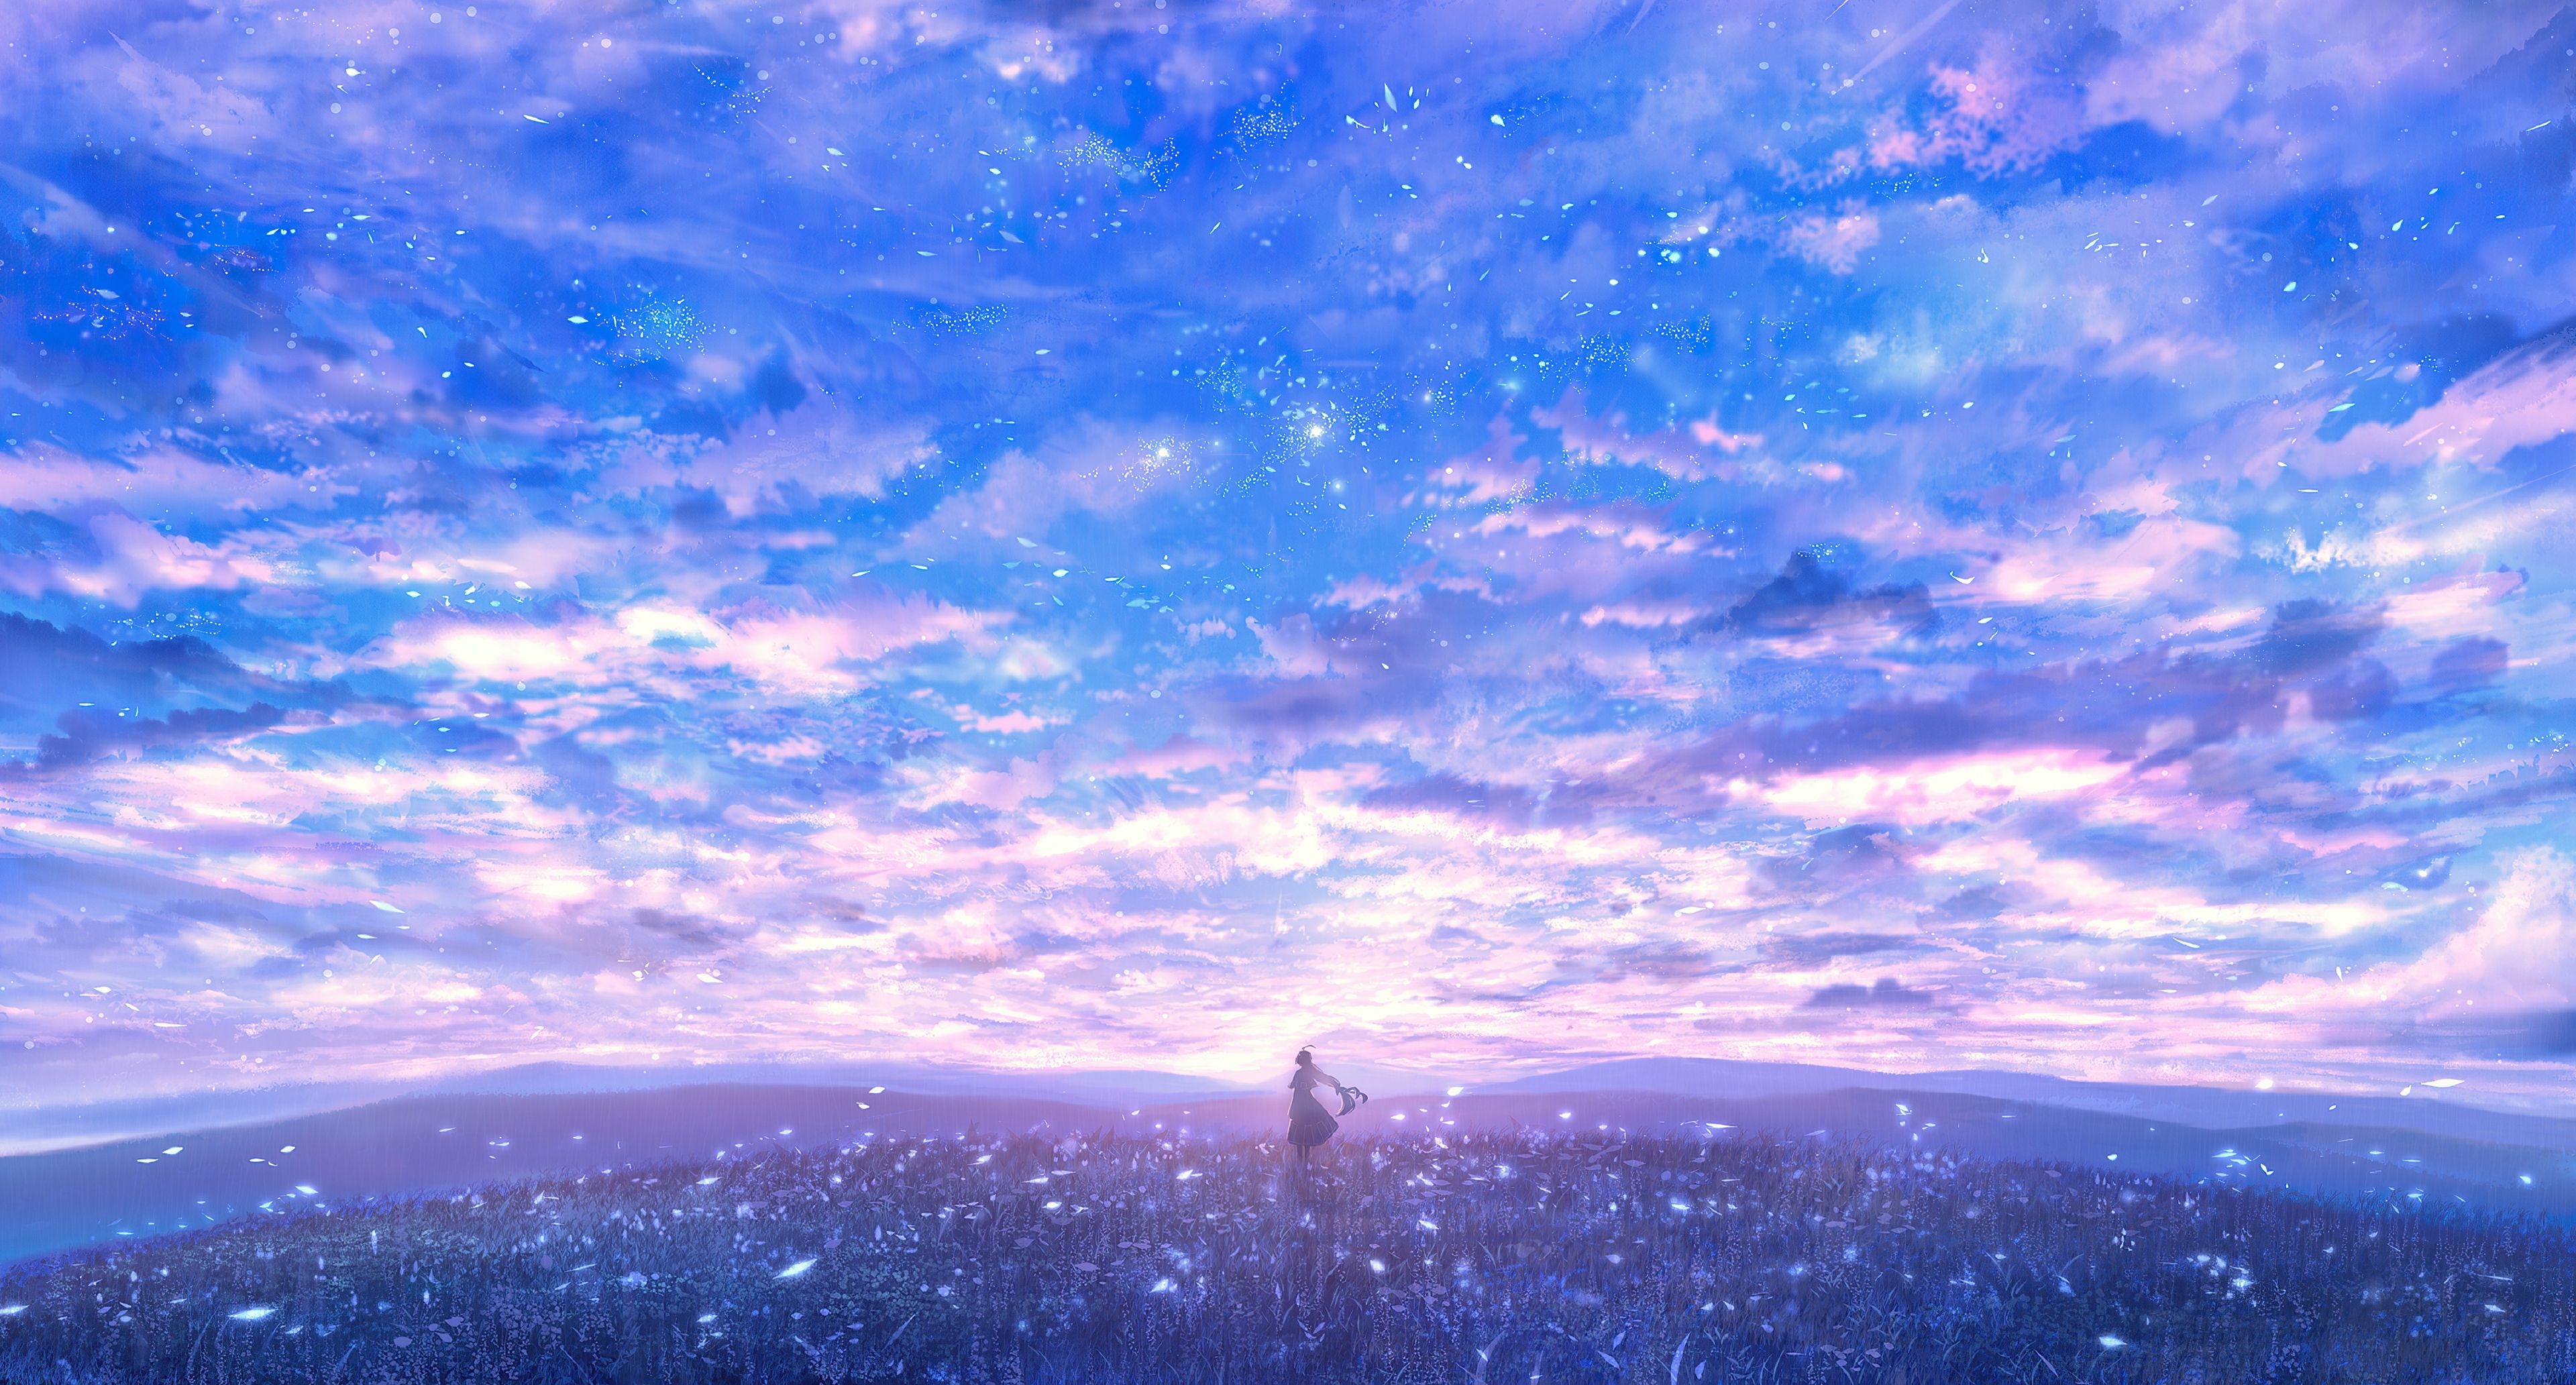 Anime Girl Sky Clouds Hd Anime 4k Wallpapers Images Backgrounds Photos And Pictures Kulturaupice